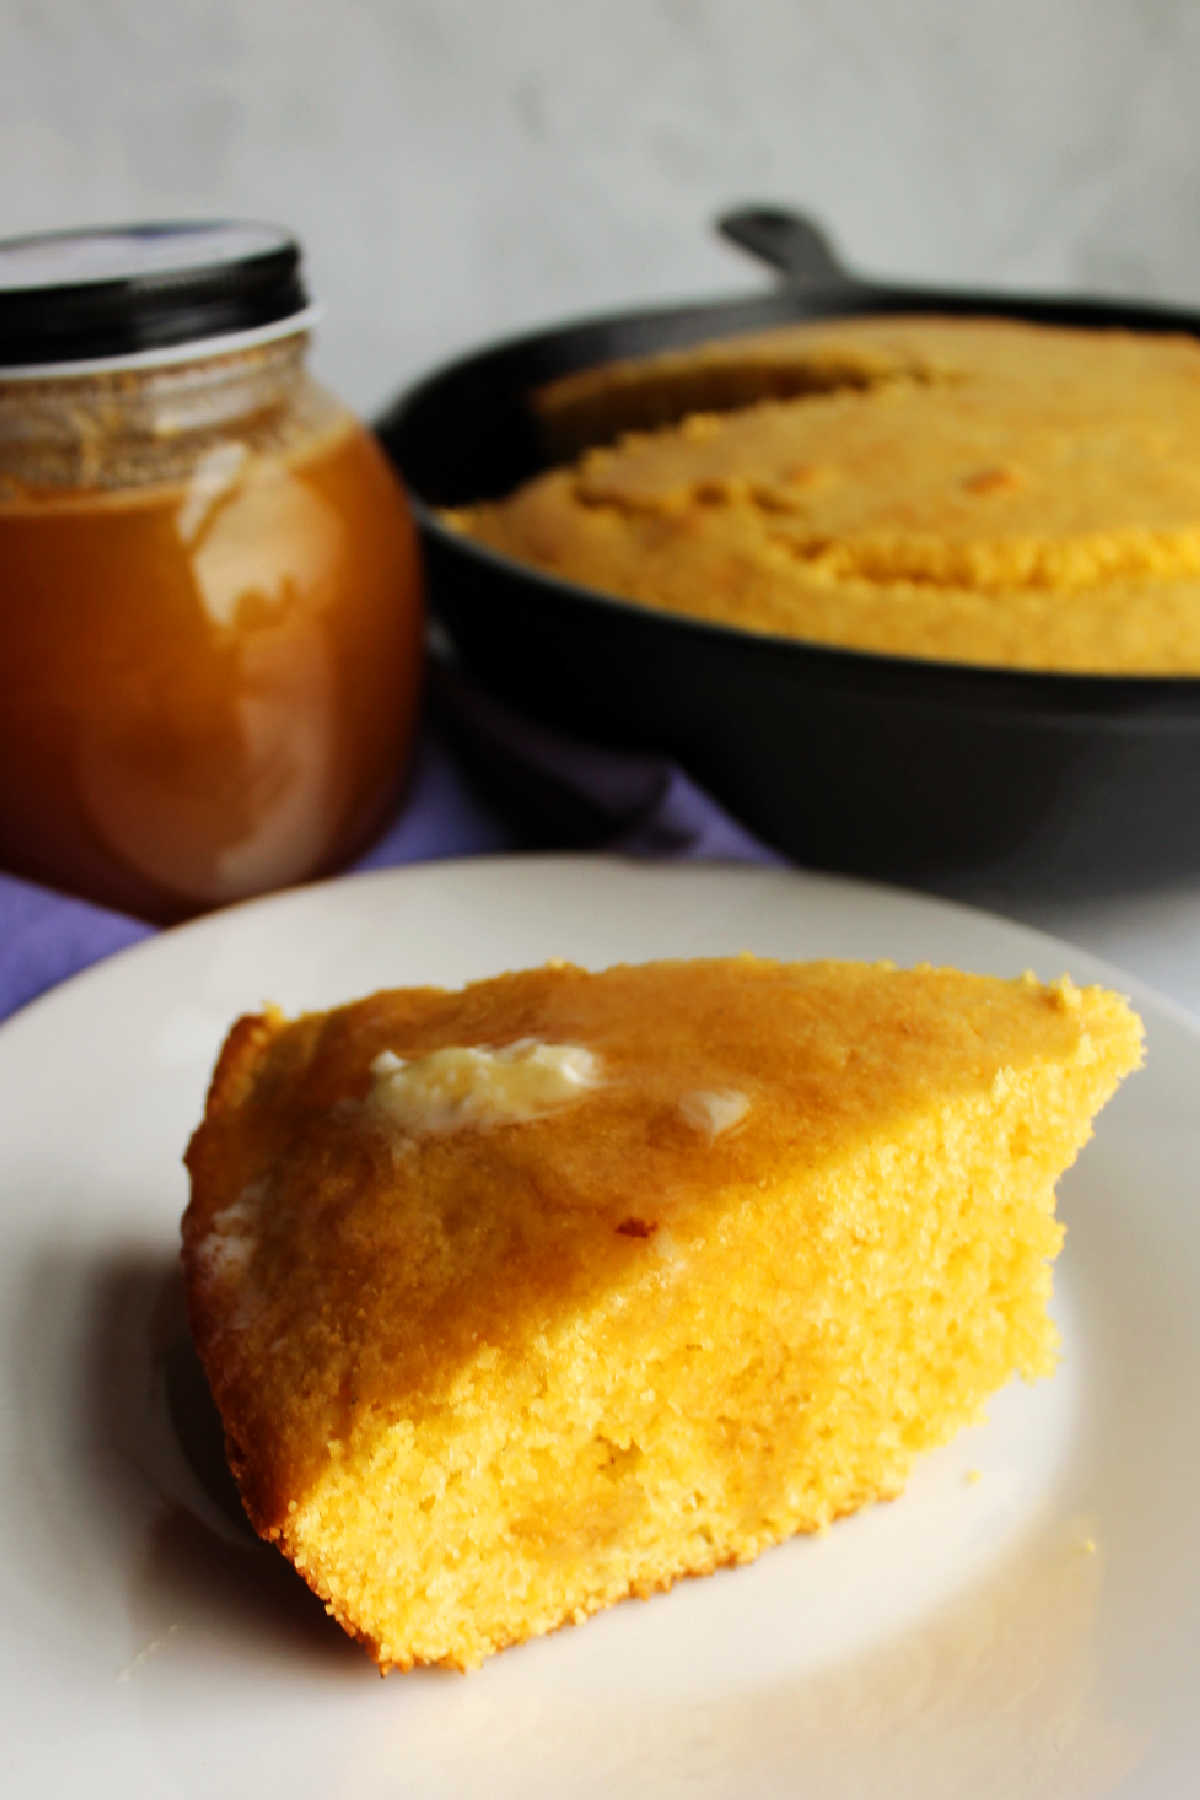 Slice of cornbread with honey and butter on top.